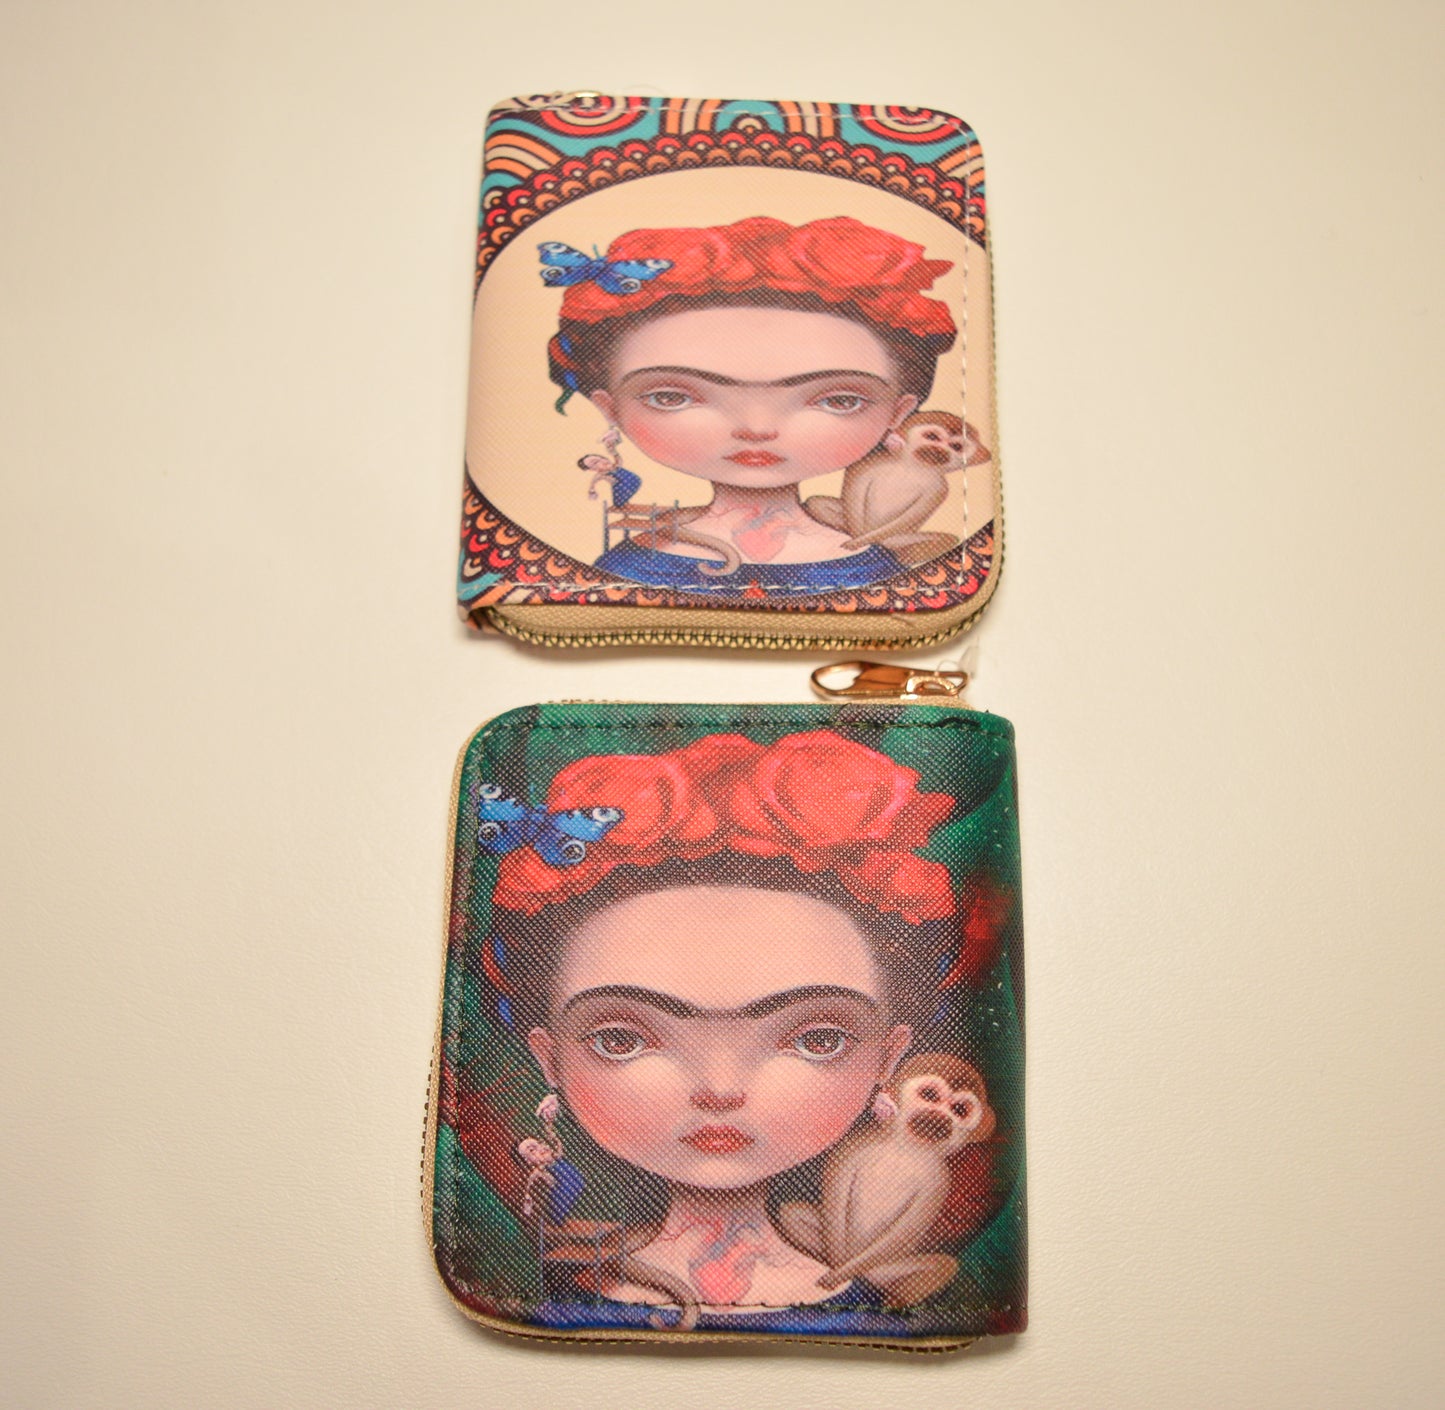 Firda kahlo wallet 4 inches by 4 inches.